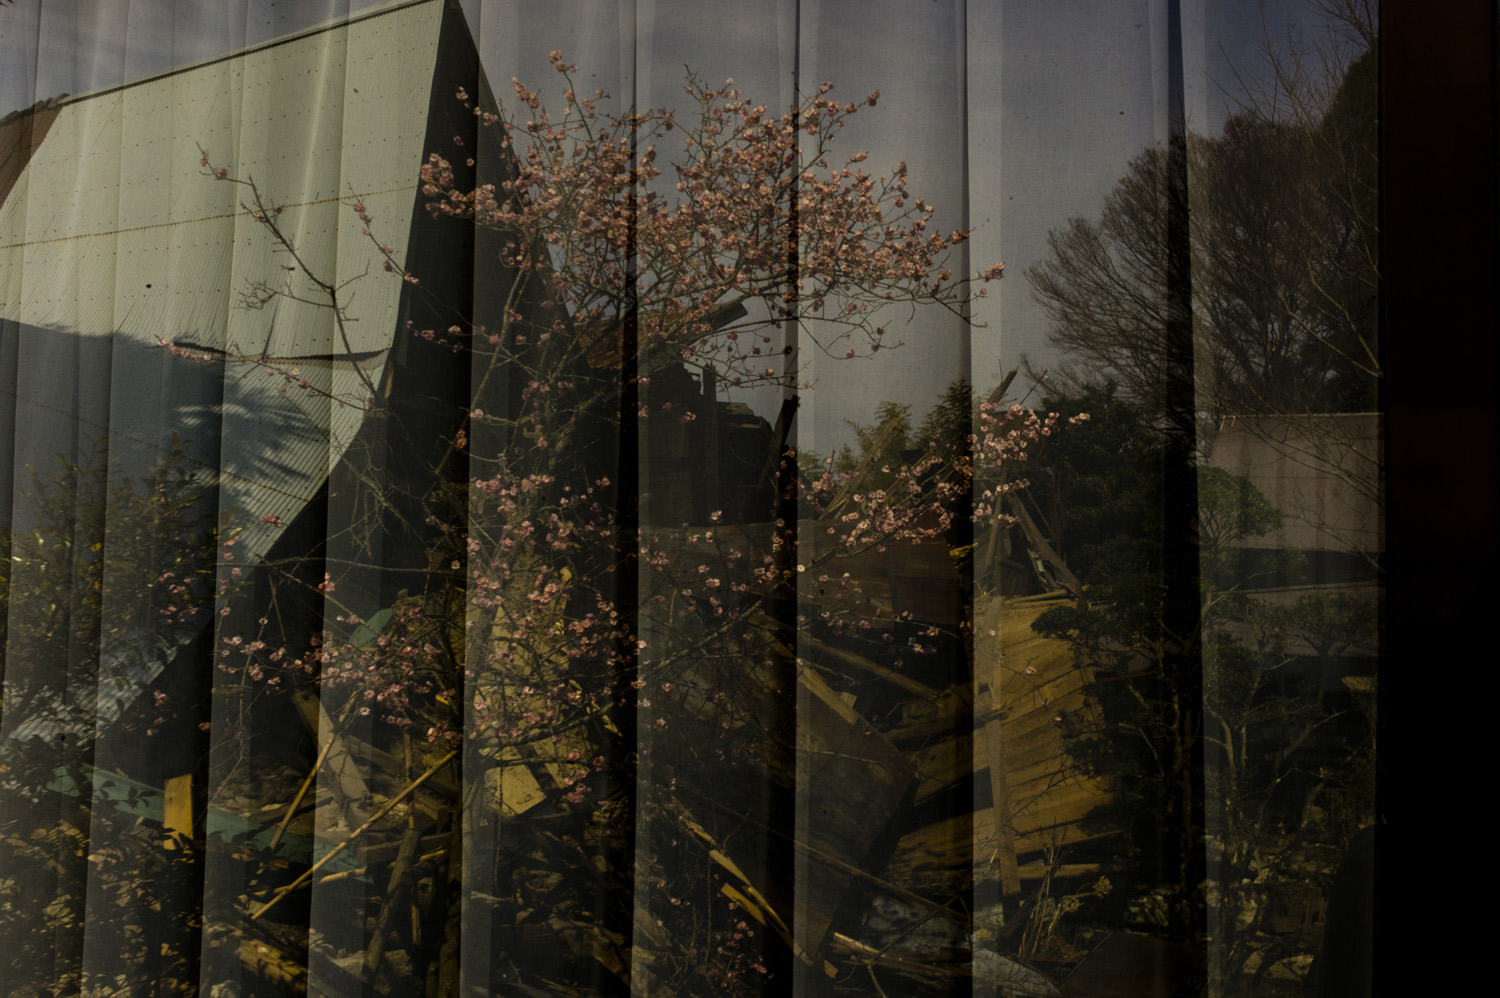 Japan, Namie, 2011.A reflection of a destroyed house and a cherry blossom tree inside the 20km exclusion zone around the damaged nuclear plant. Residents had to leave in a hurry as radiation levels reached dangerous levels.